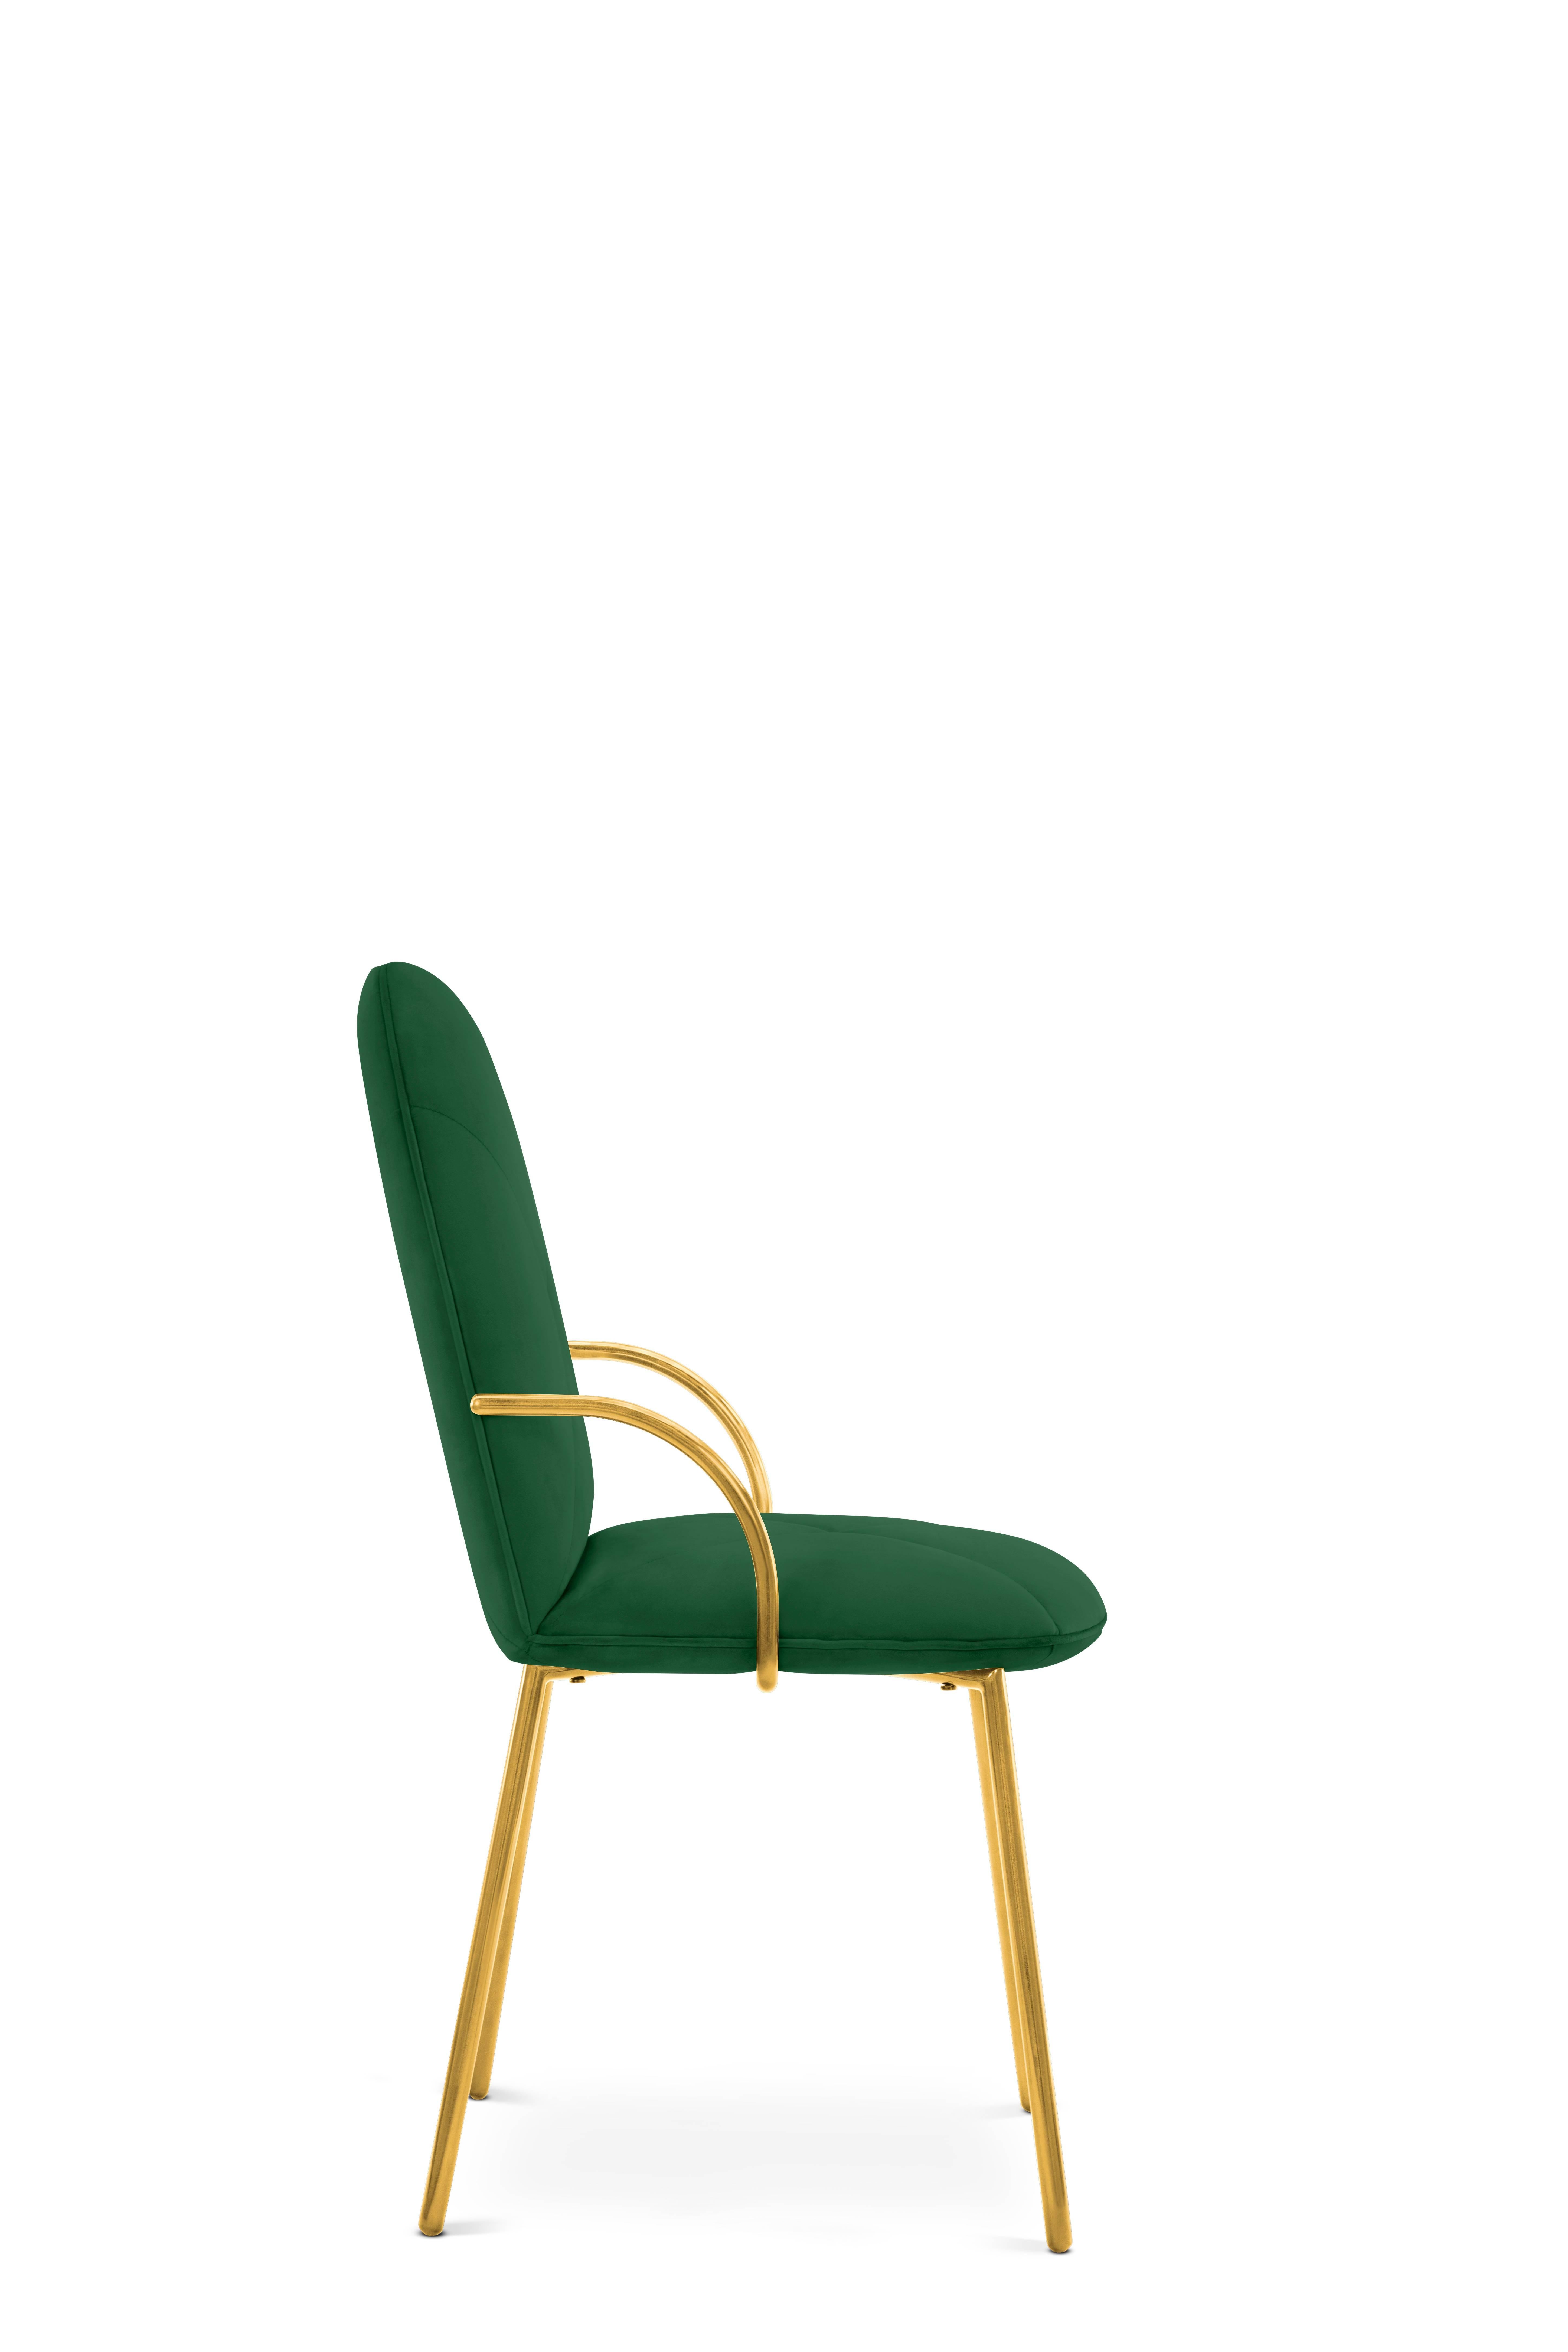 Indian Orion Chair Green by Nika Zupanc for Scarlet Splendour For Sale